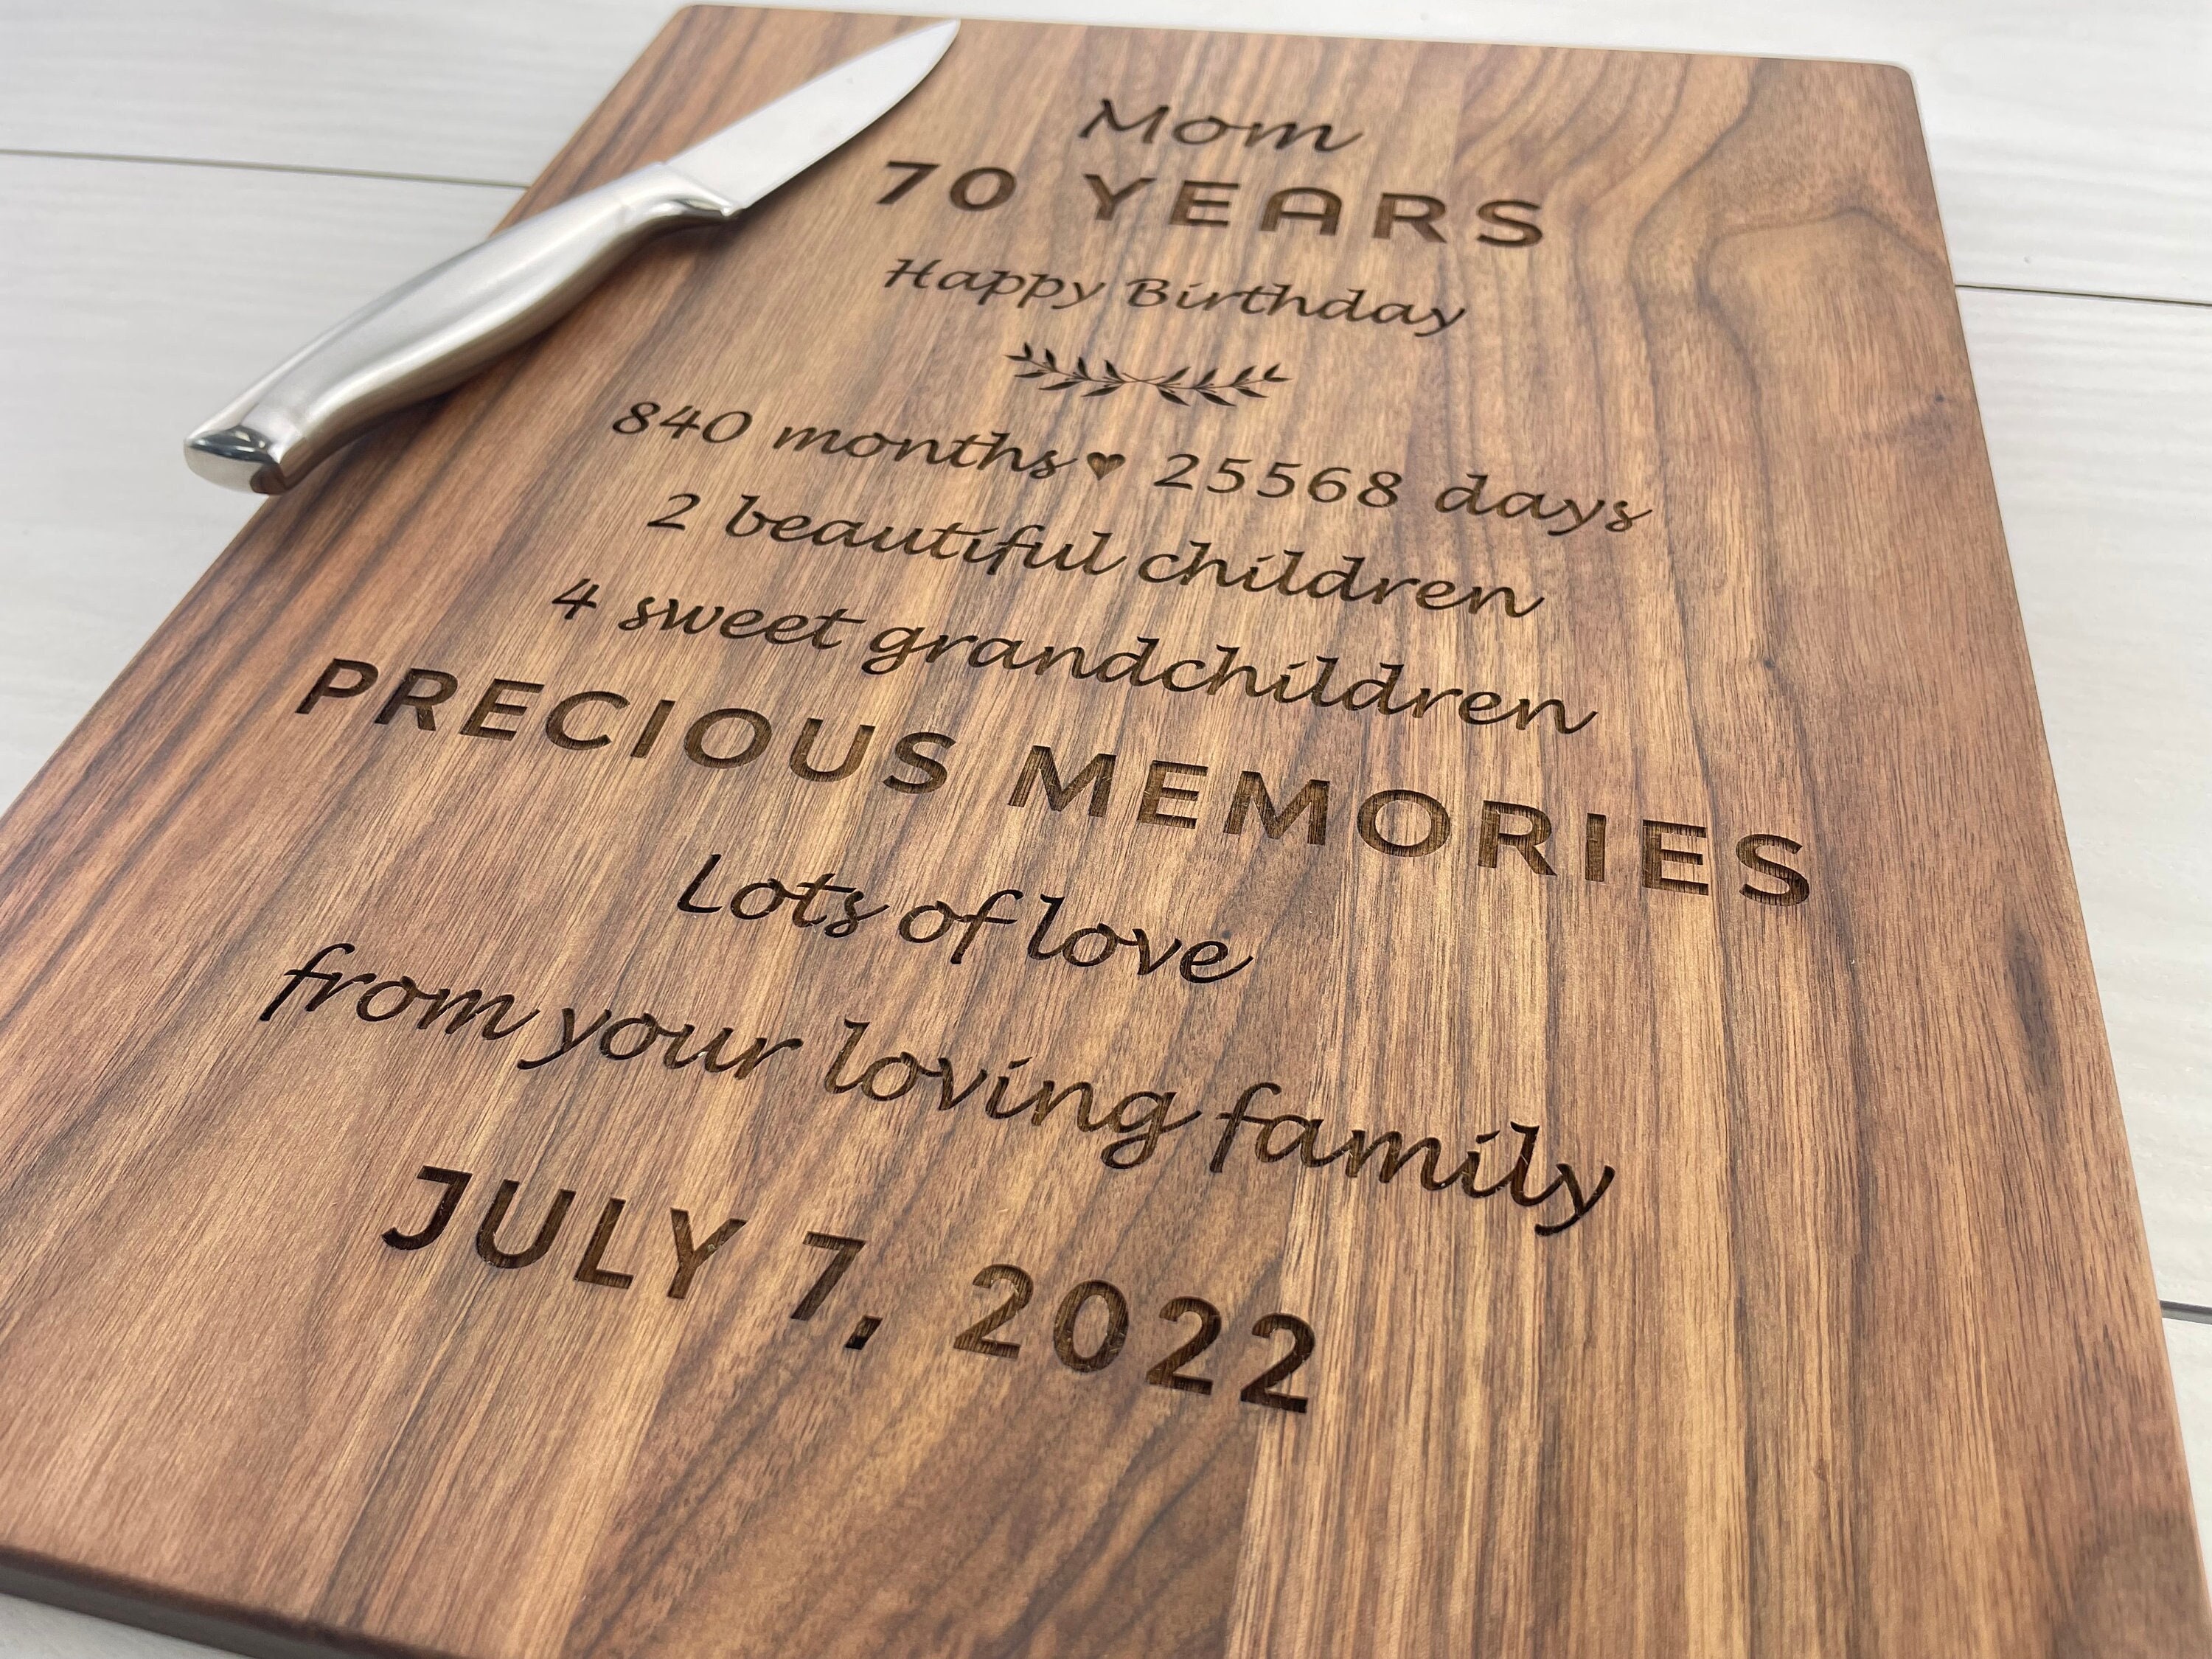 Custom Cutting Board Mothers Day Gift For the World's Greatest Mom  Laser-engraved Personalized Bamboo Cheese Board Happy Mothers Day